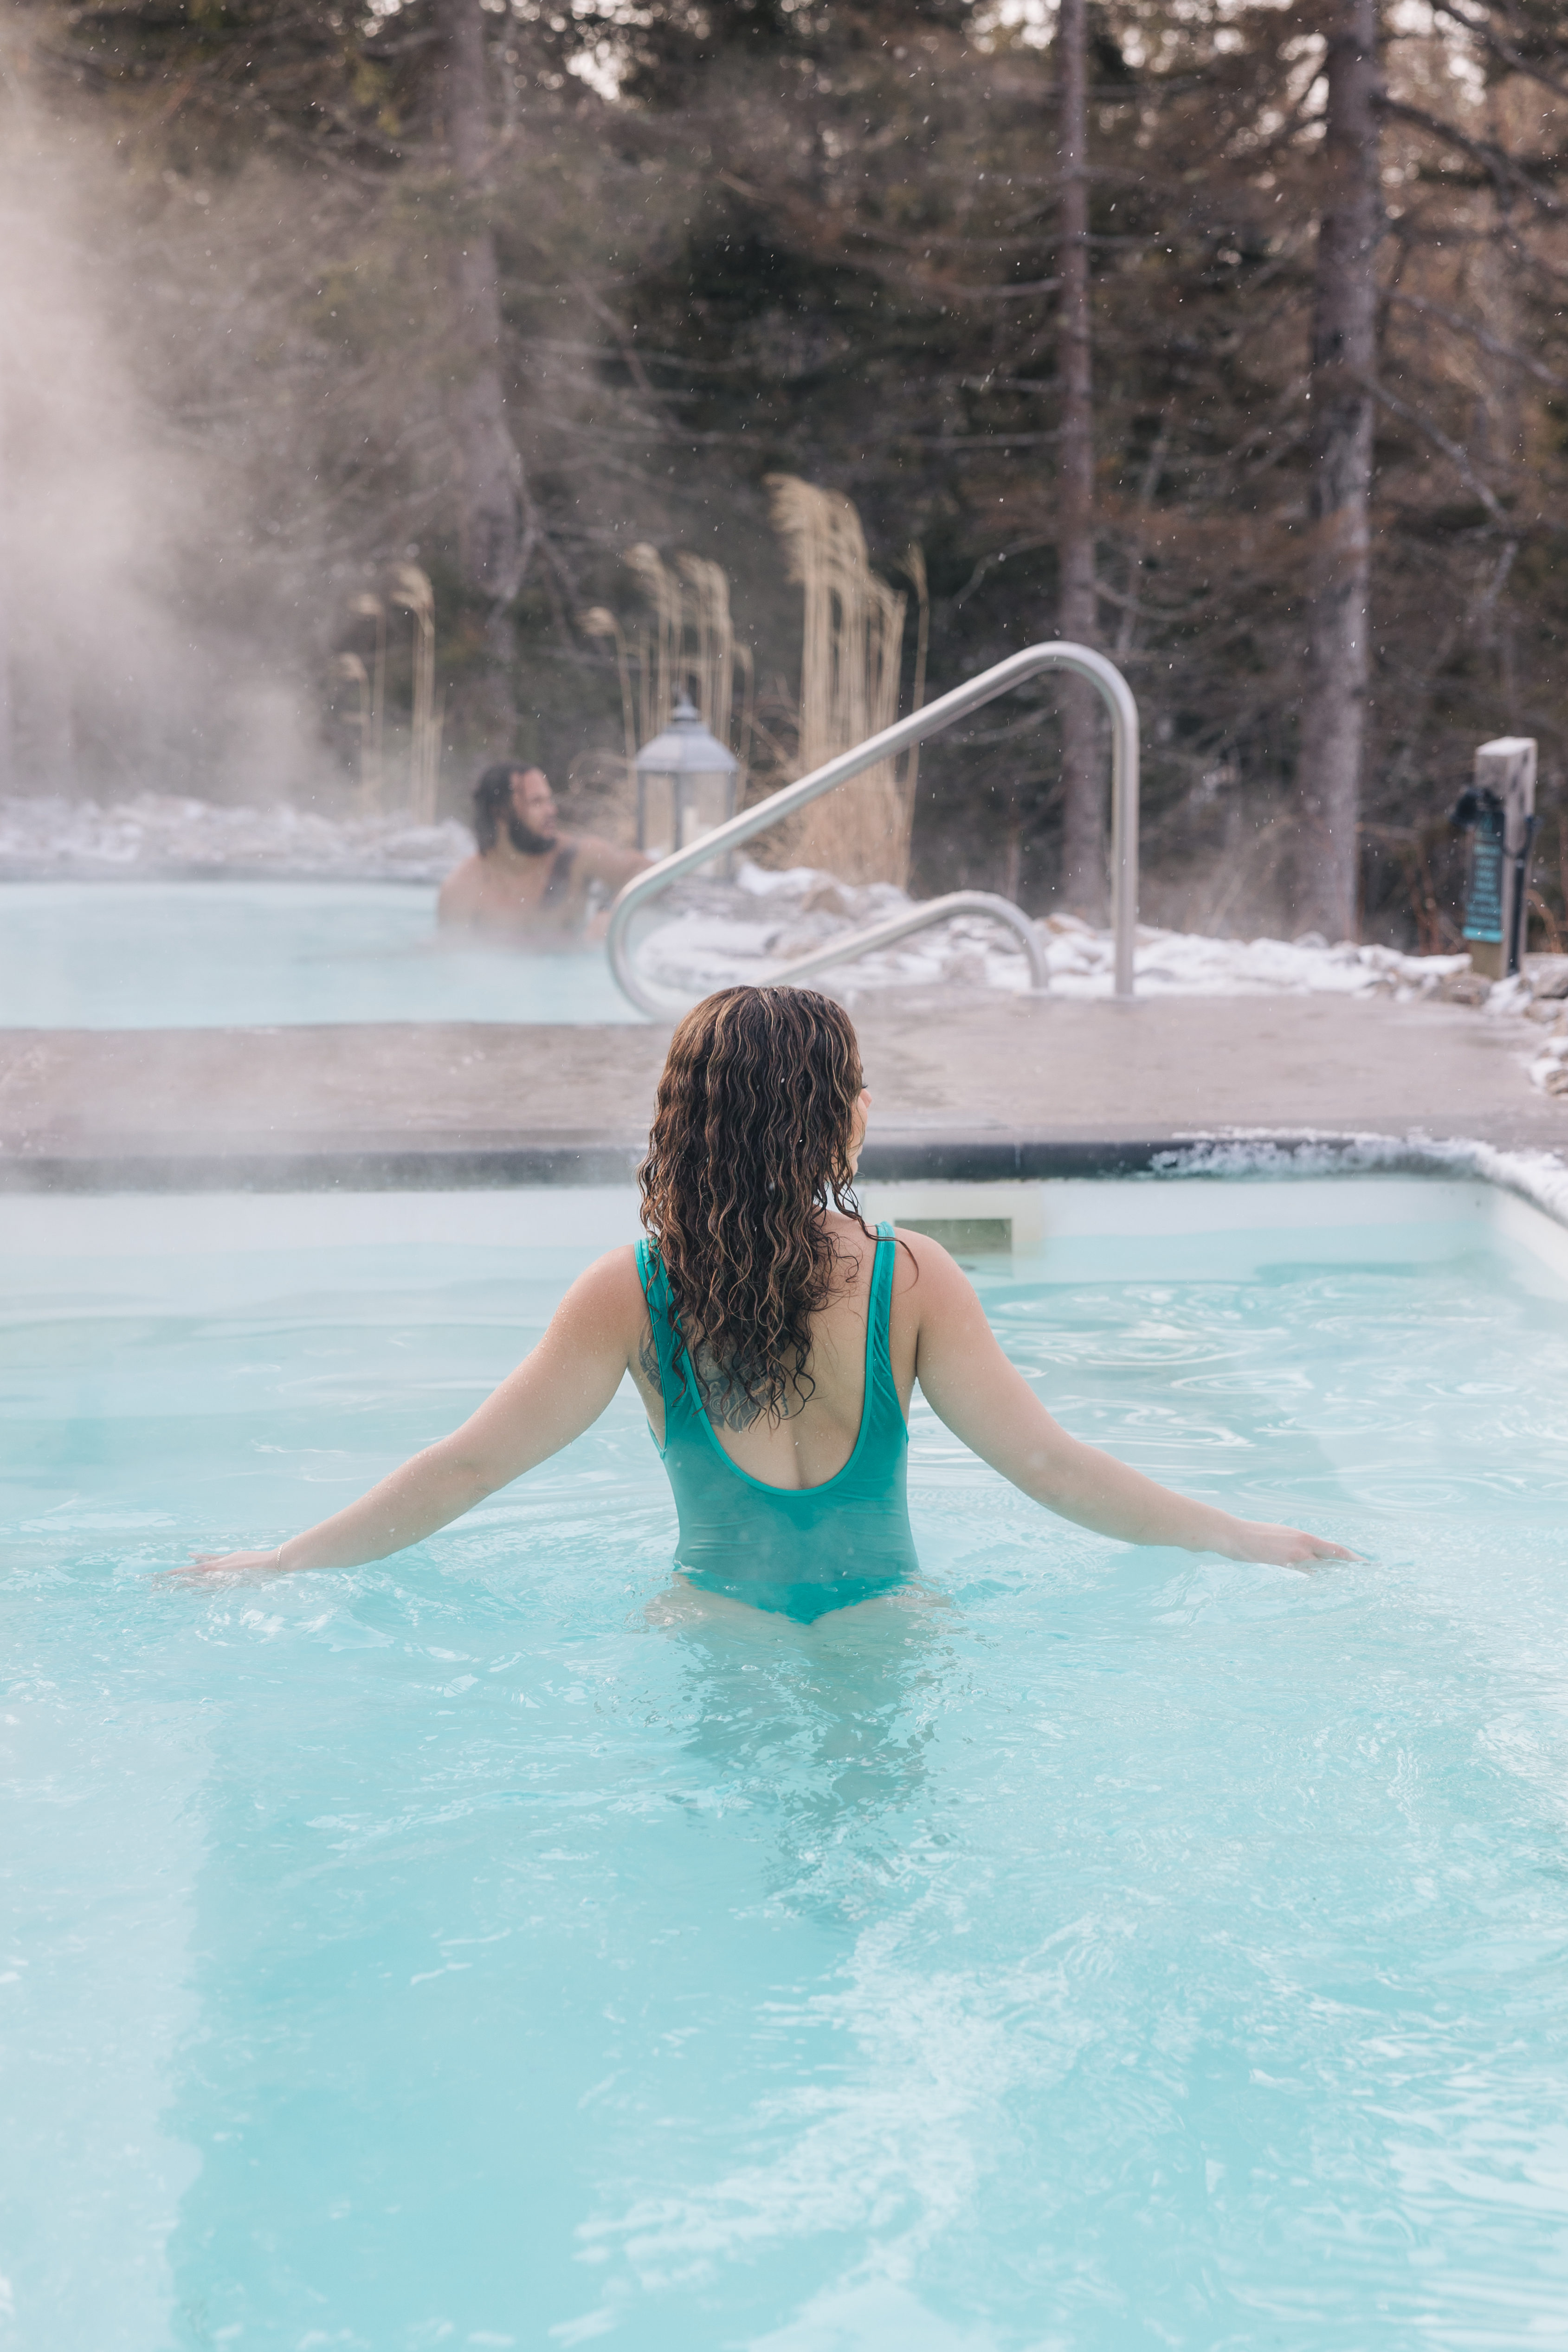 Woman in a hot tub with her arms out in winter wearing a green bathing suit. Man in a second hot tub in the background.